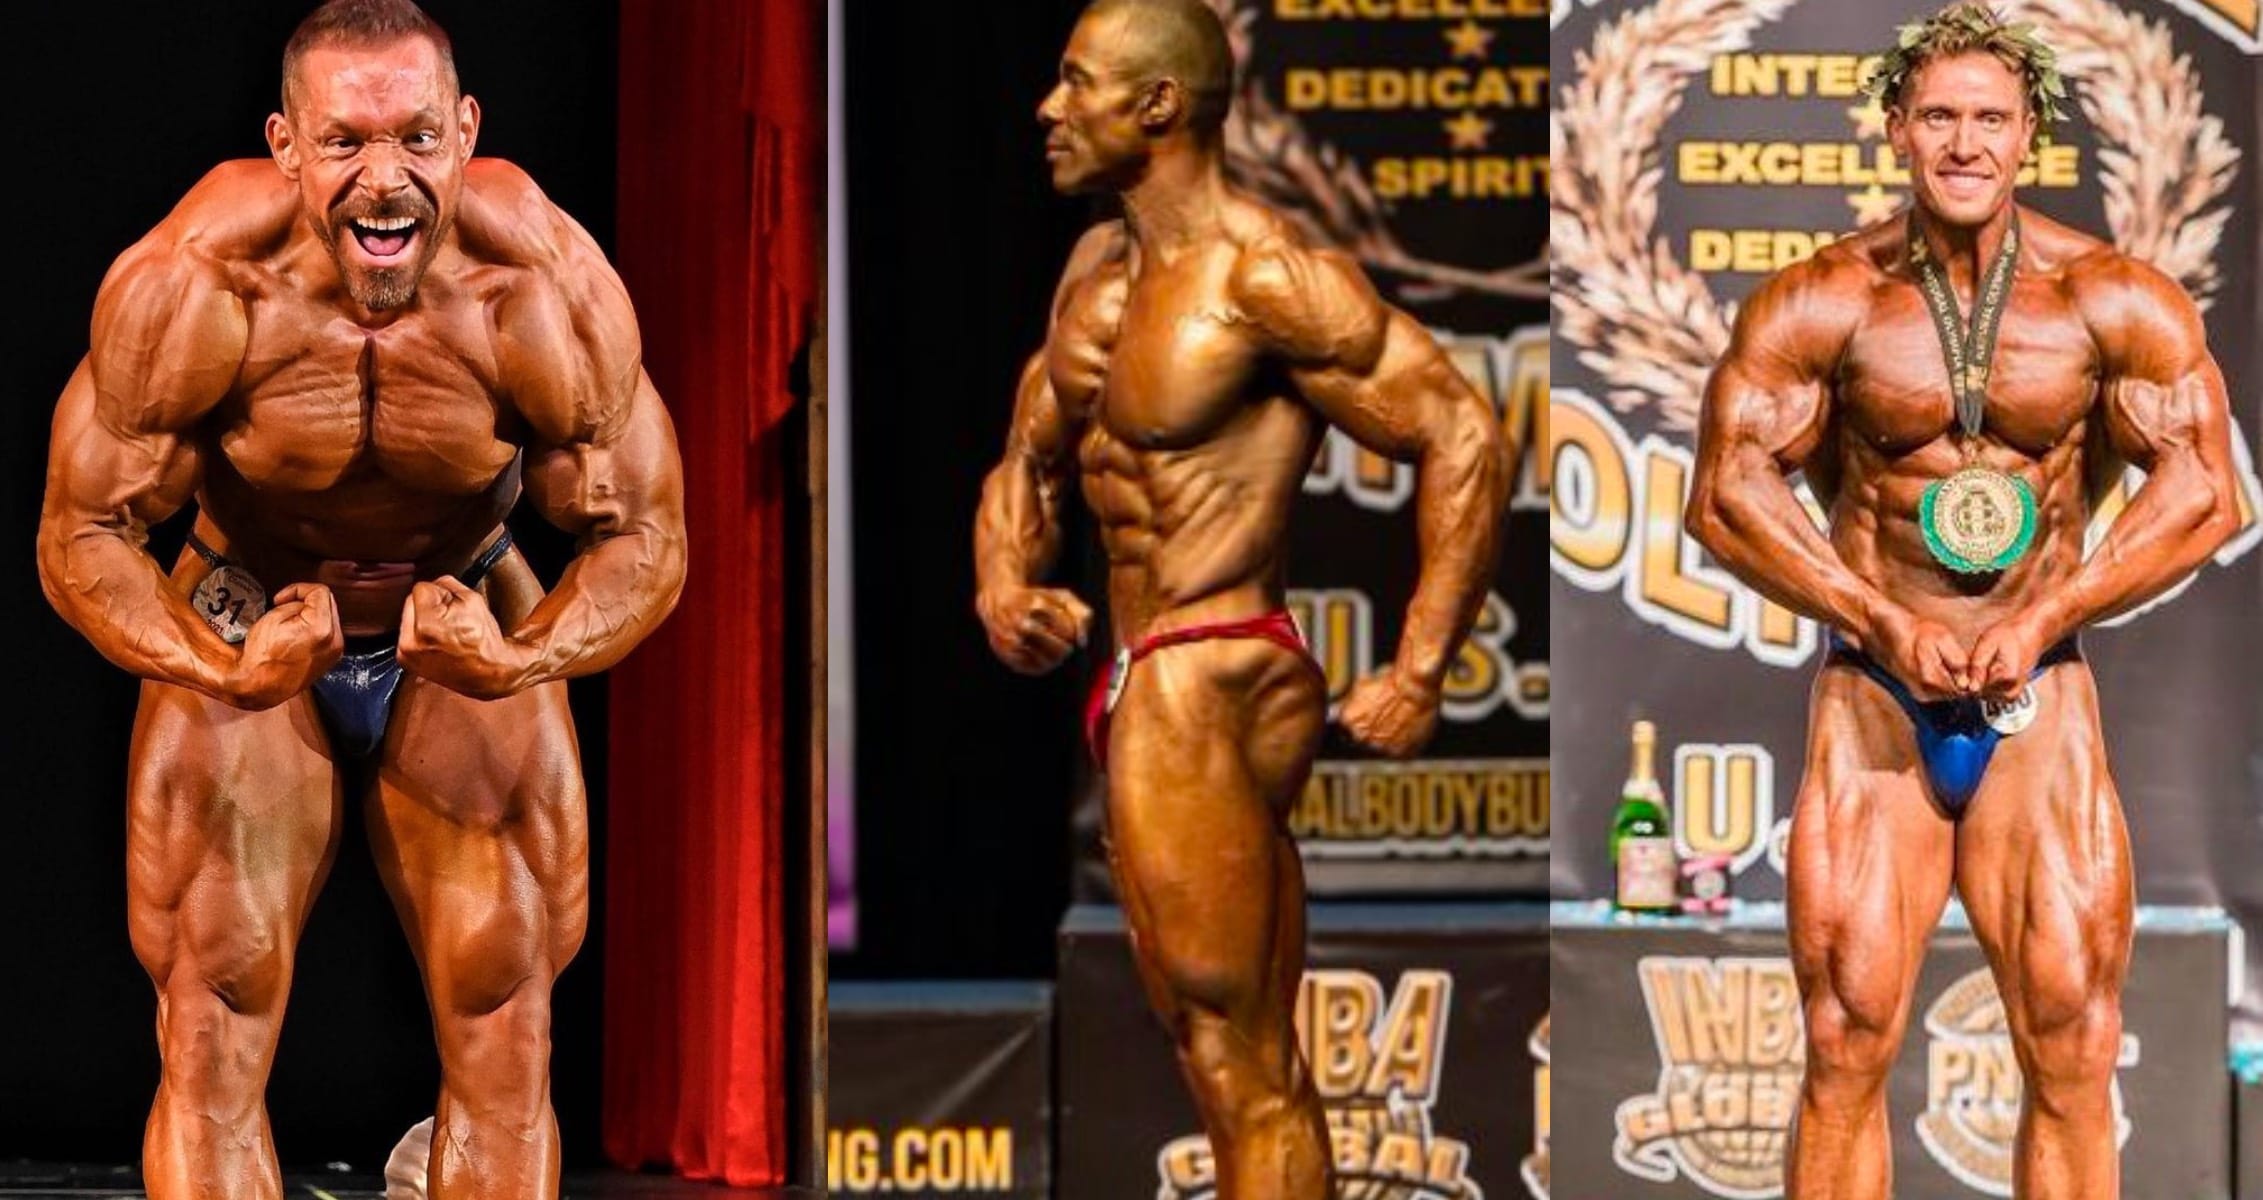 A Complete List Of Natural Olympia Winners Throughout The Years